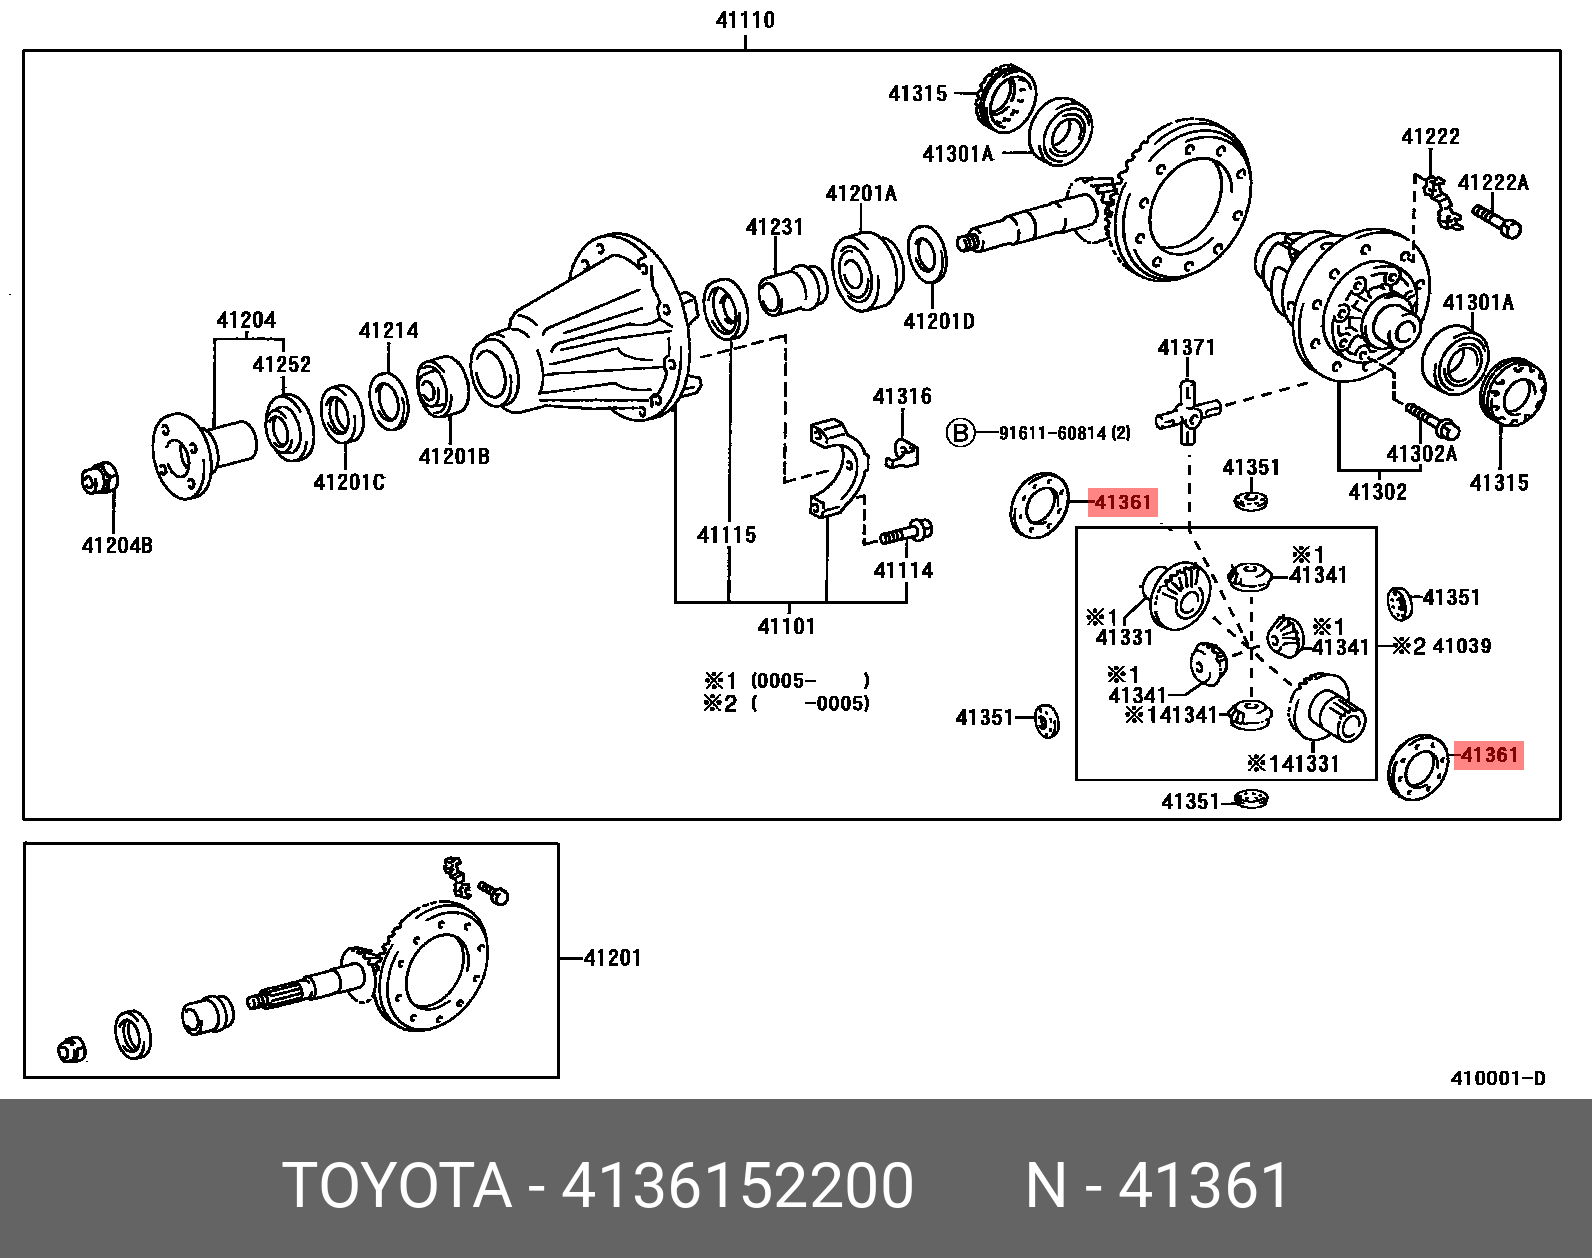 4136152200, YARIS 202002-, KSP210, MXPA1#, MXPH1#, WASHER, REAR DIFFERENTIAL SIDE GEAR THRUST, NO.1